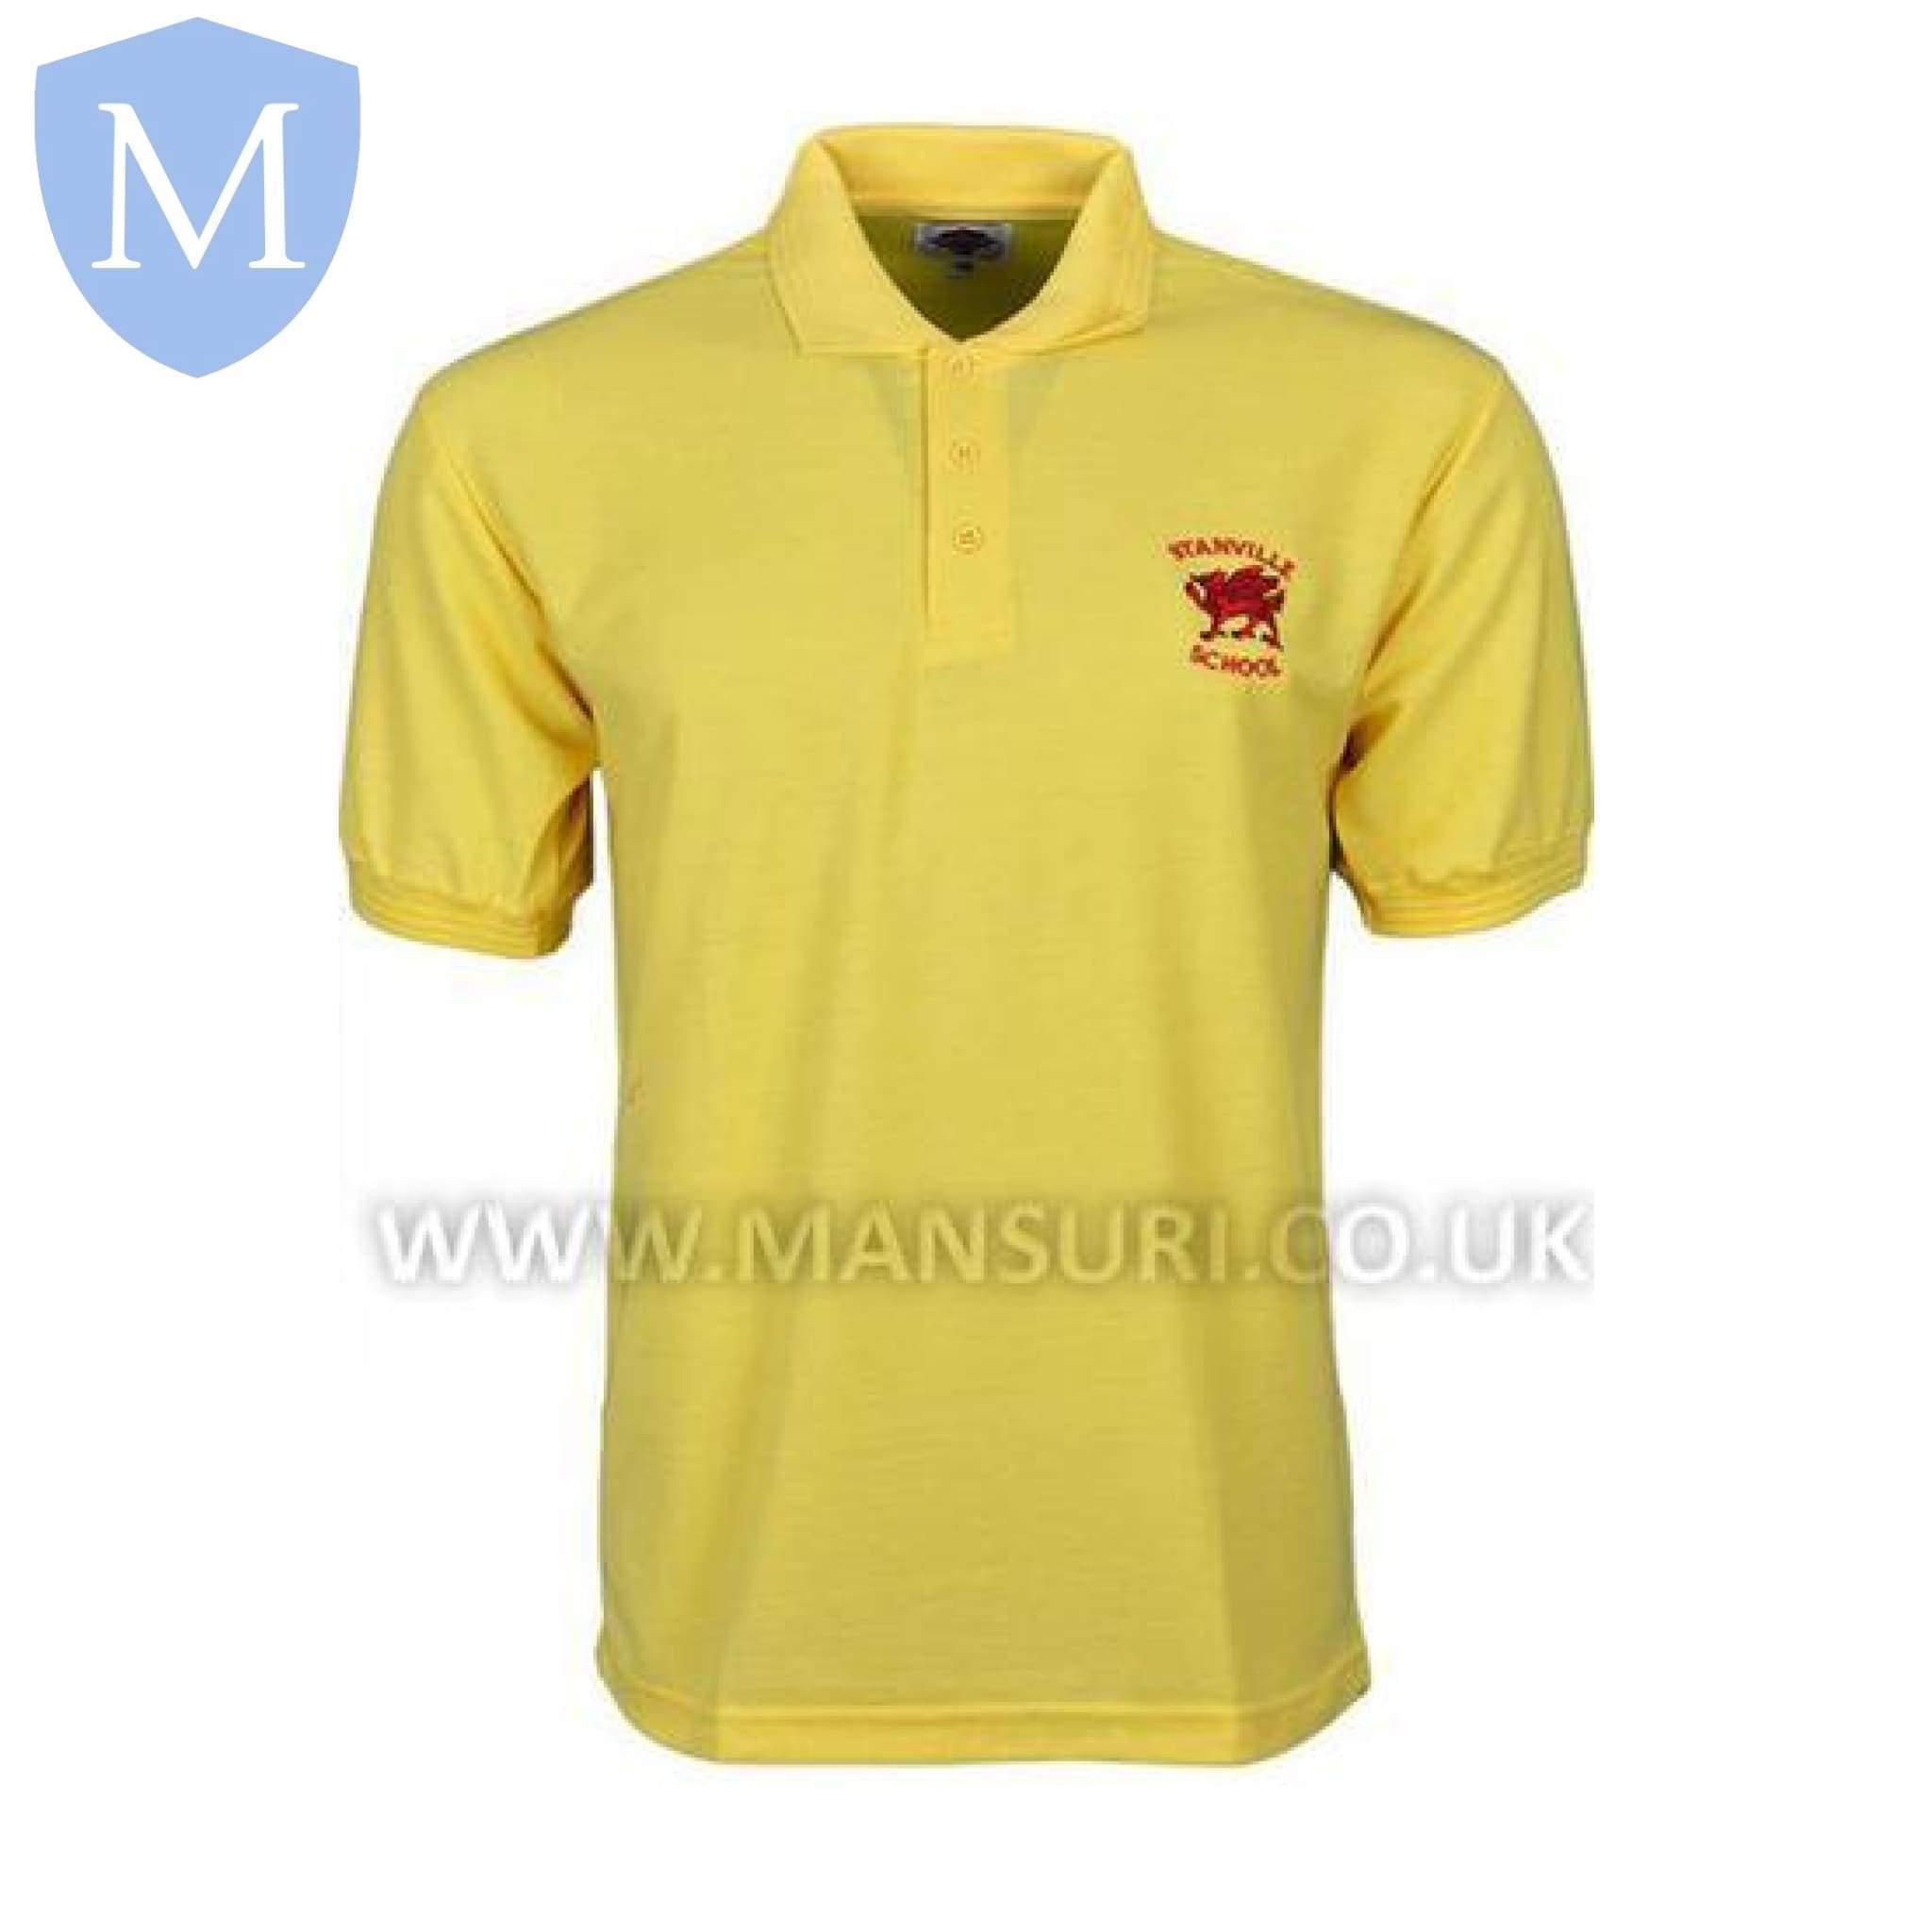 Stanville Primary Polo Shirts Size 18,Size 22 - 2 Years,Size 24 - 3-4 Years,Size 26 - 5-6 Years,Size 28 - 7-8 Years,Size 30 - 9-10 Years,Size 32 - 11-12Years,Size 34 - 12-13 Years,Size 36 Small,Size 38 Medium,Size 40 Large,Size 42 X-Large